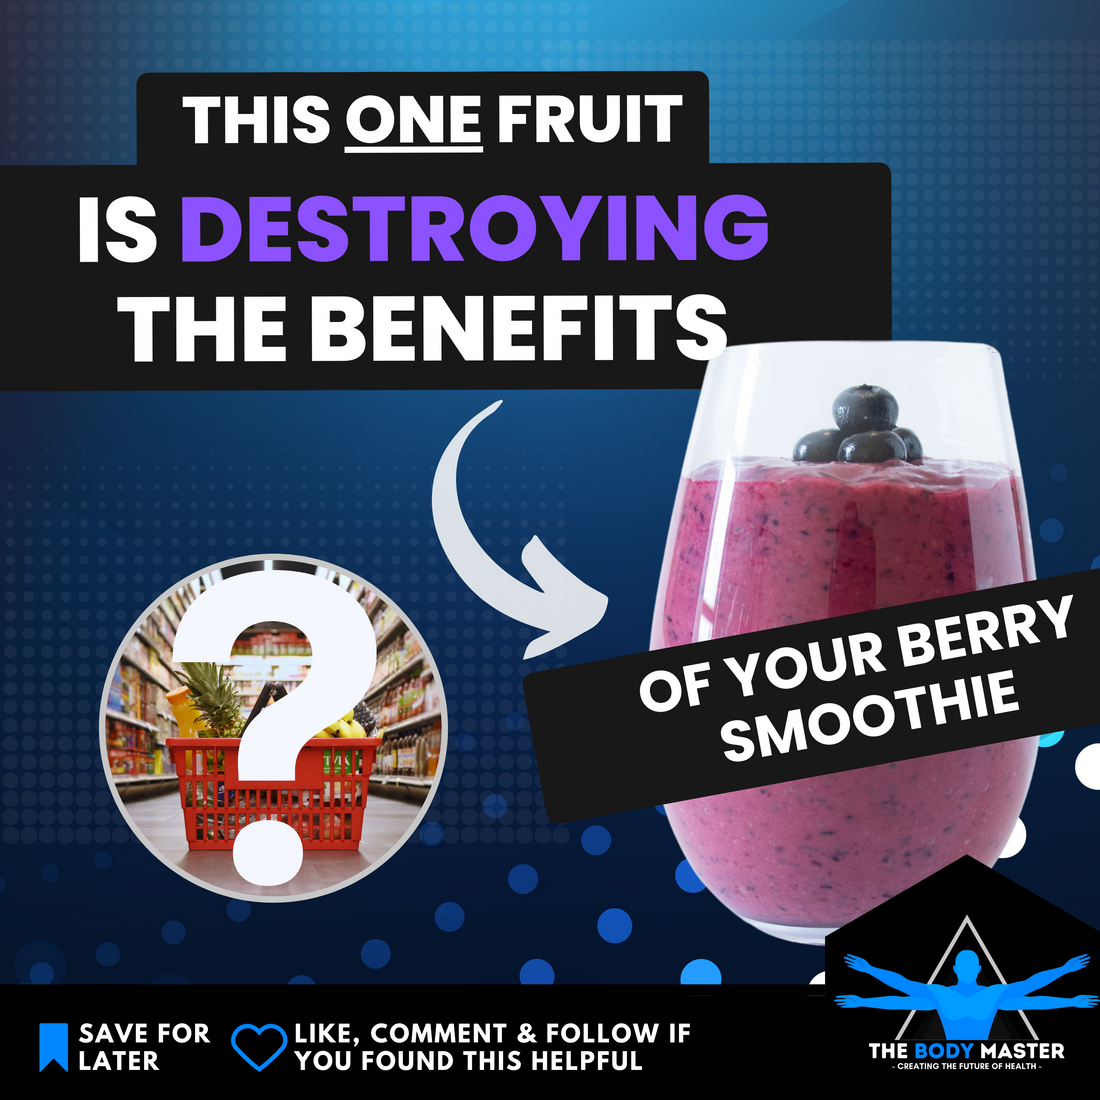 This one fruit is destroying the benefits of your berry smoothie